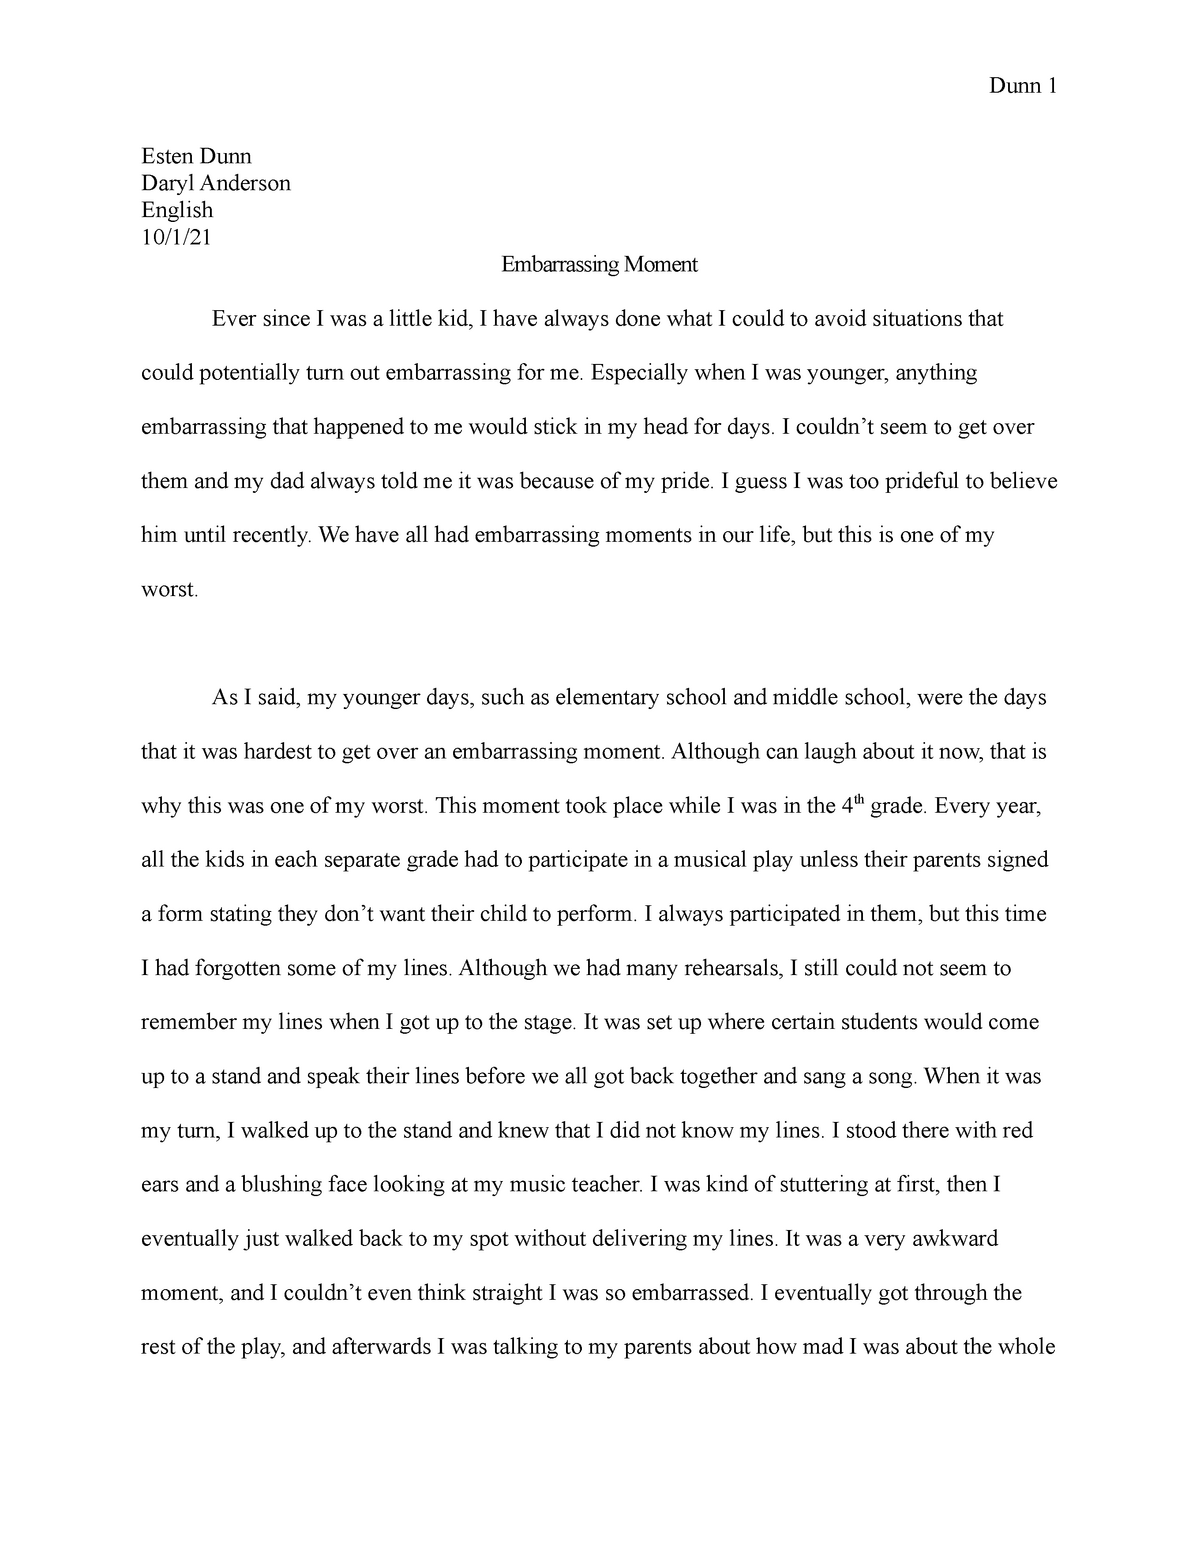 story about embarrassing moment essay